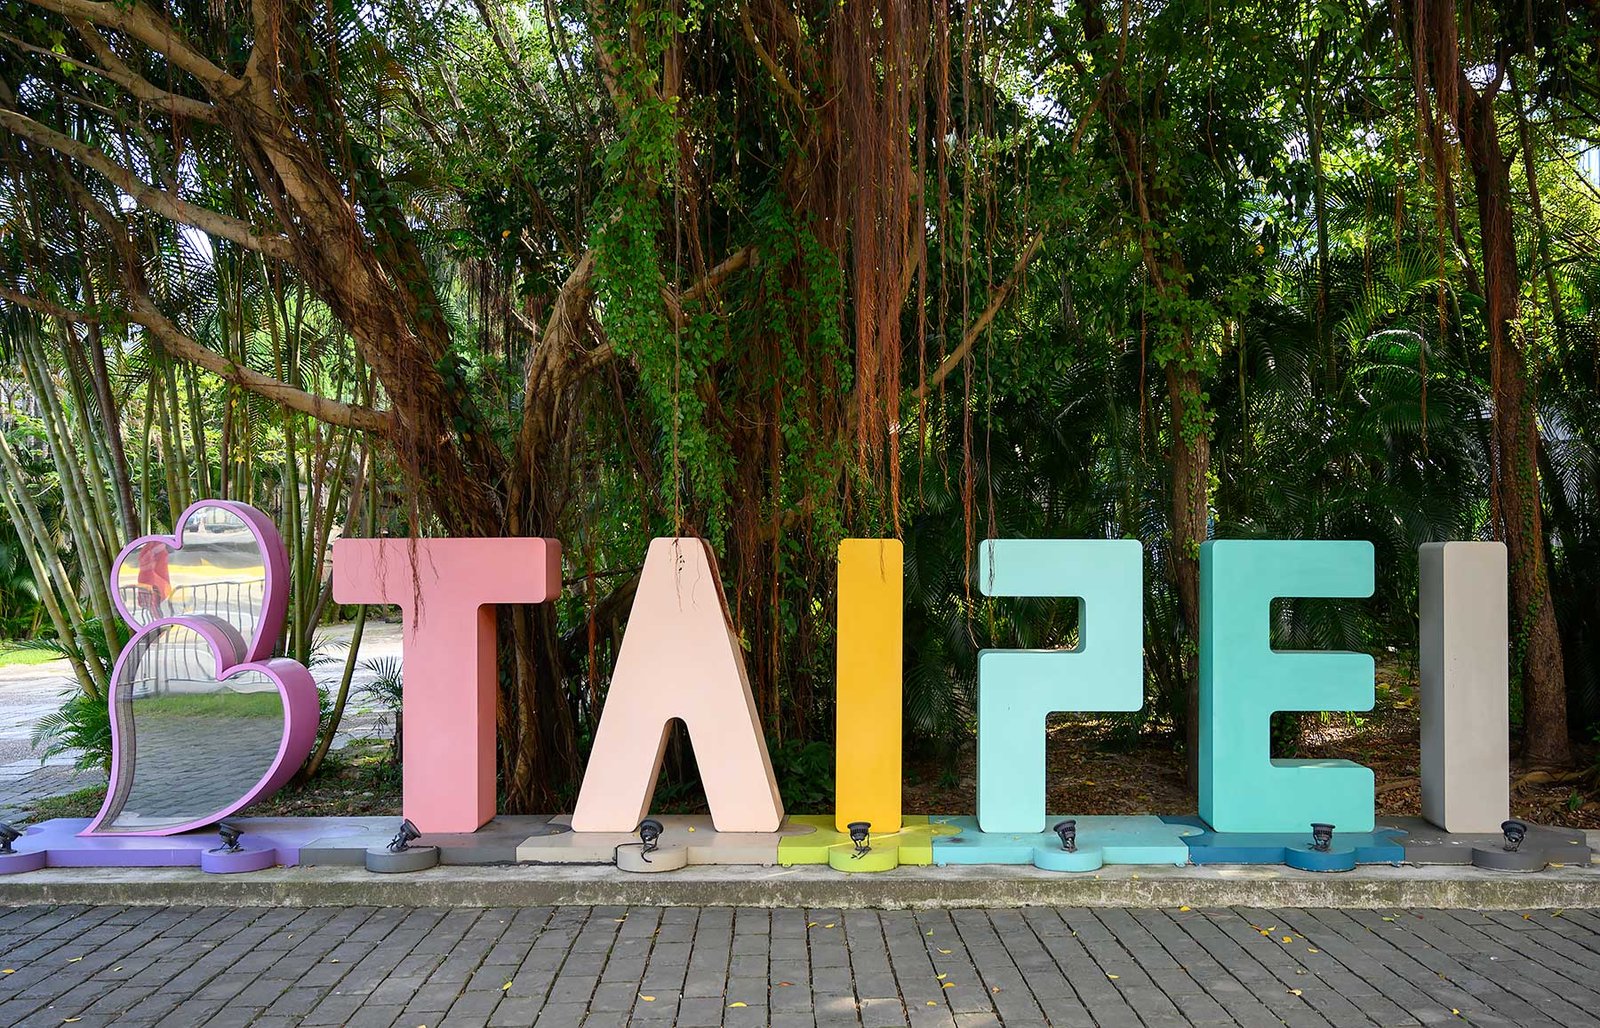 Songshan Cultural and Creative Park with the colourful Taipei sign